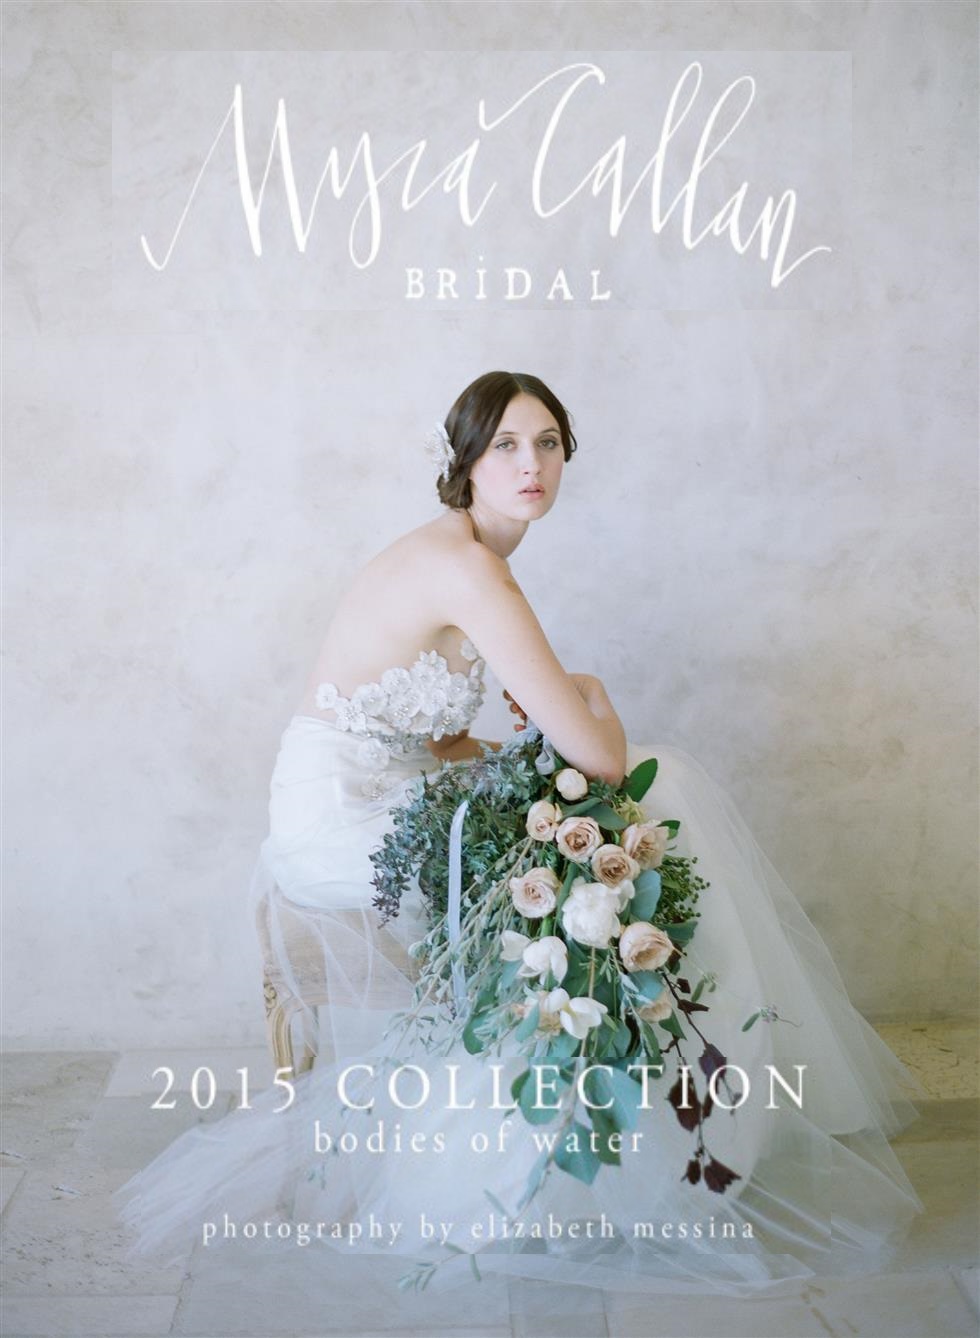 Bodies of Water - The Beautiful 2015 Bridal Collection from Myra Callan for Twigs & Honey